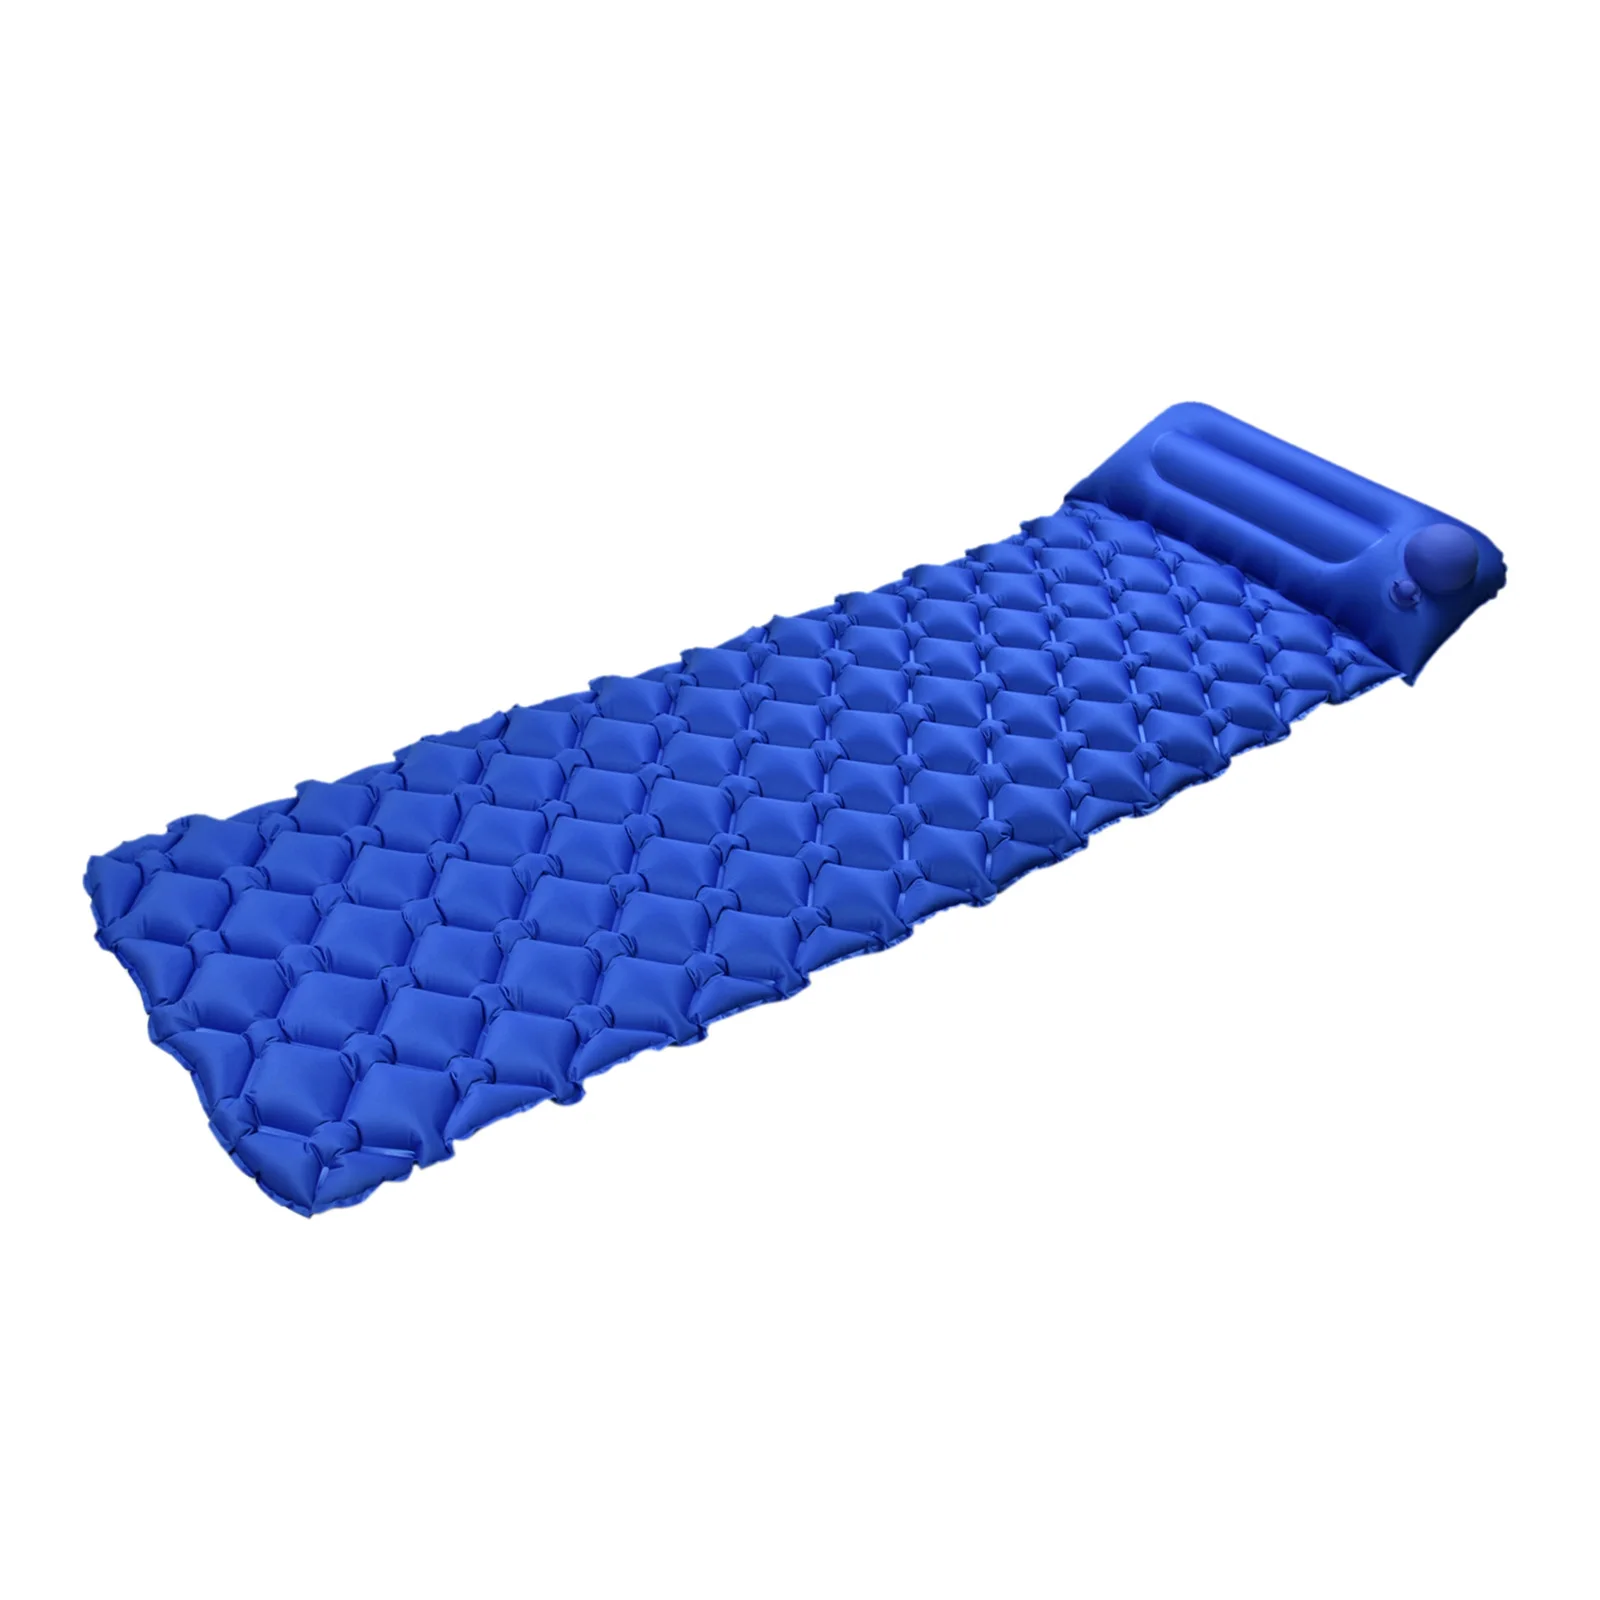 

Outdoor Camping Mat Inflatable Mattress Ultralight Air Bed Portable Tent Sleeping Pad Camp Moisture-proof Pad with Carrying Bag